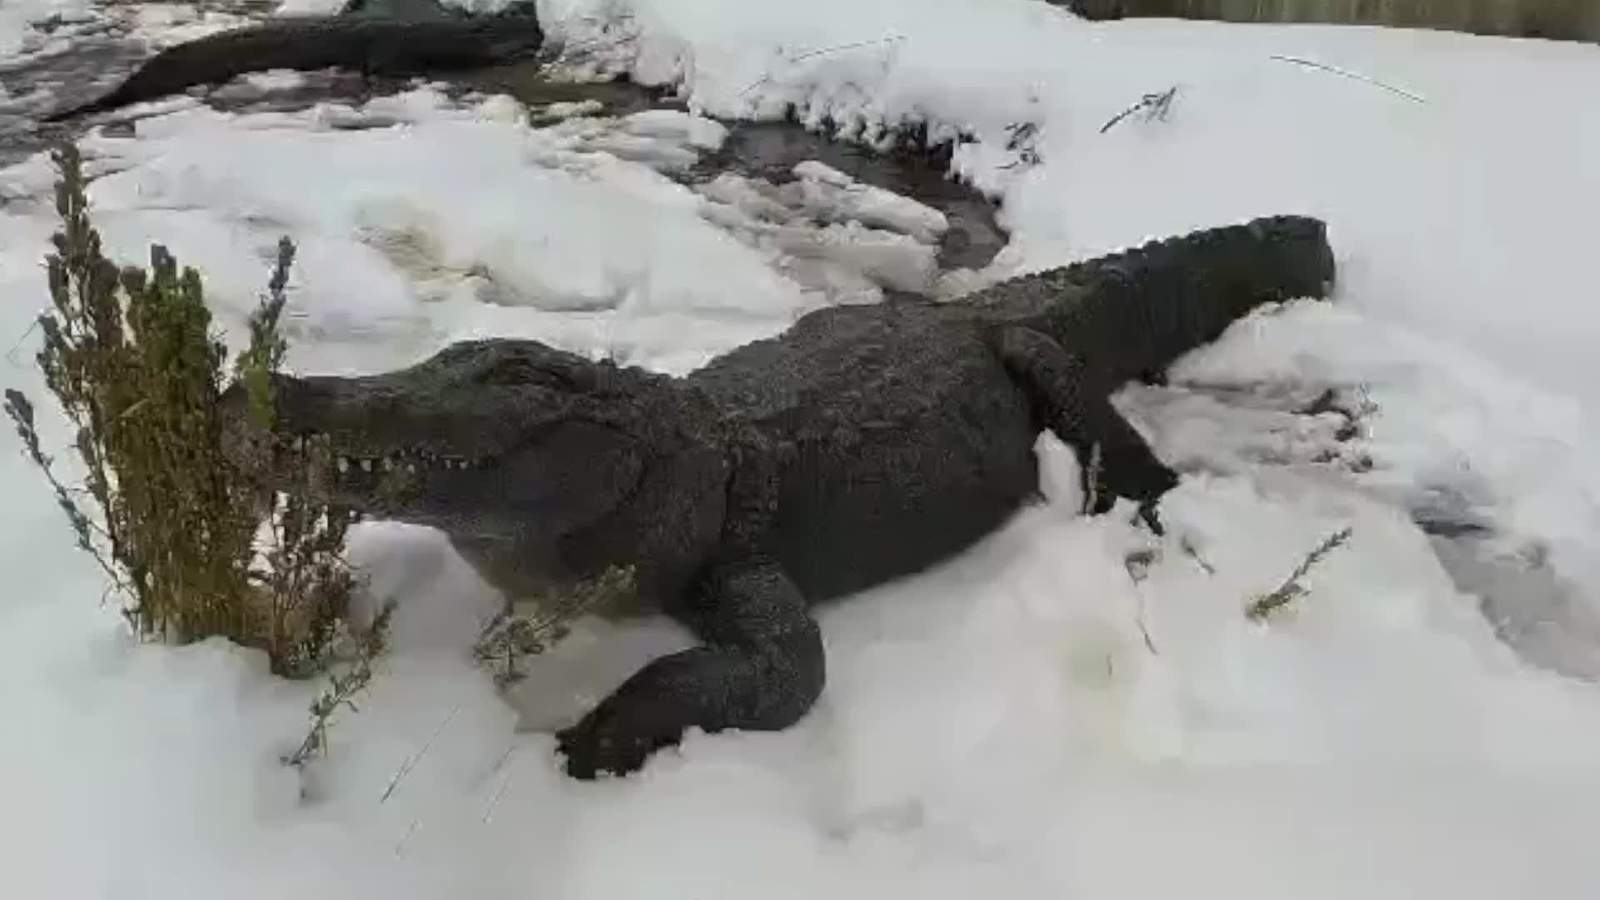 Ever see an alligator sunbathe in snow? In Colorado you can